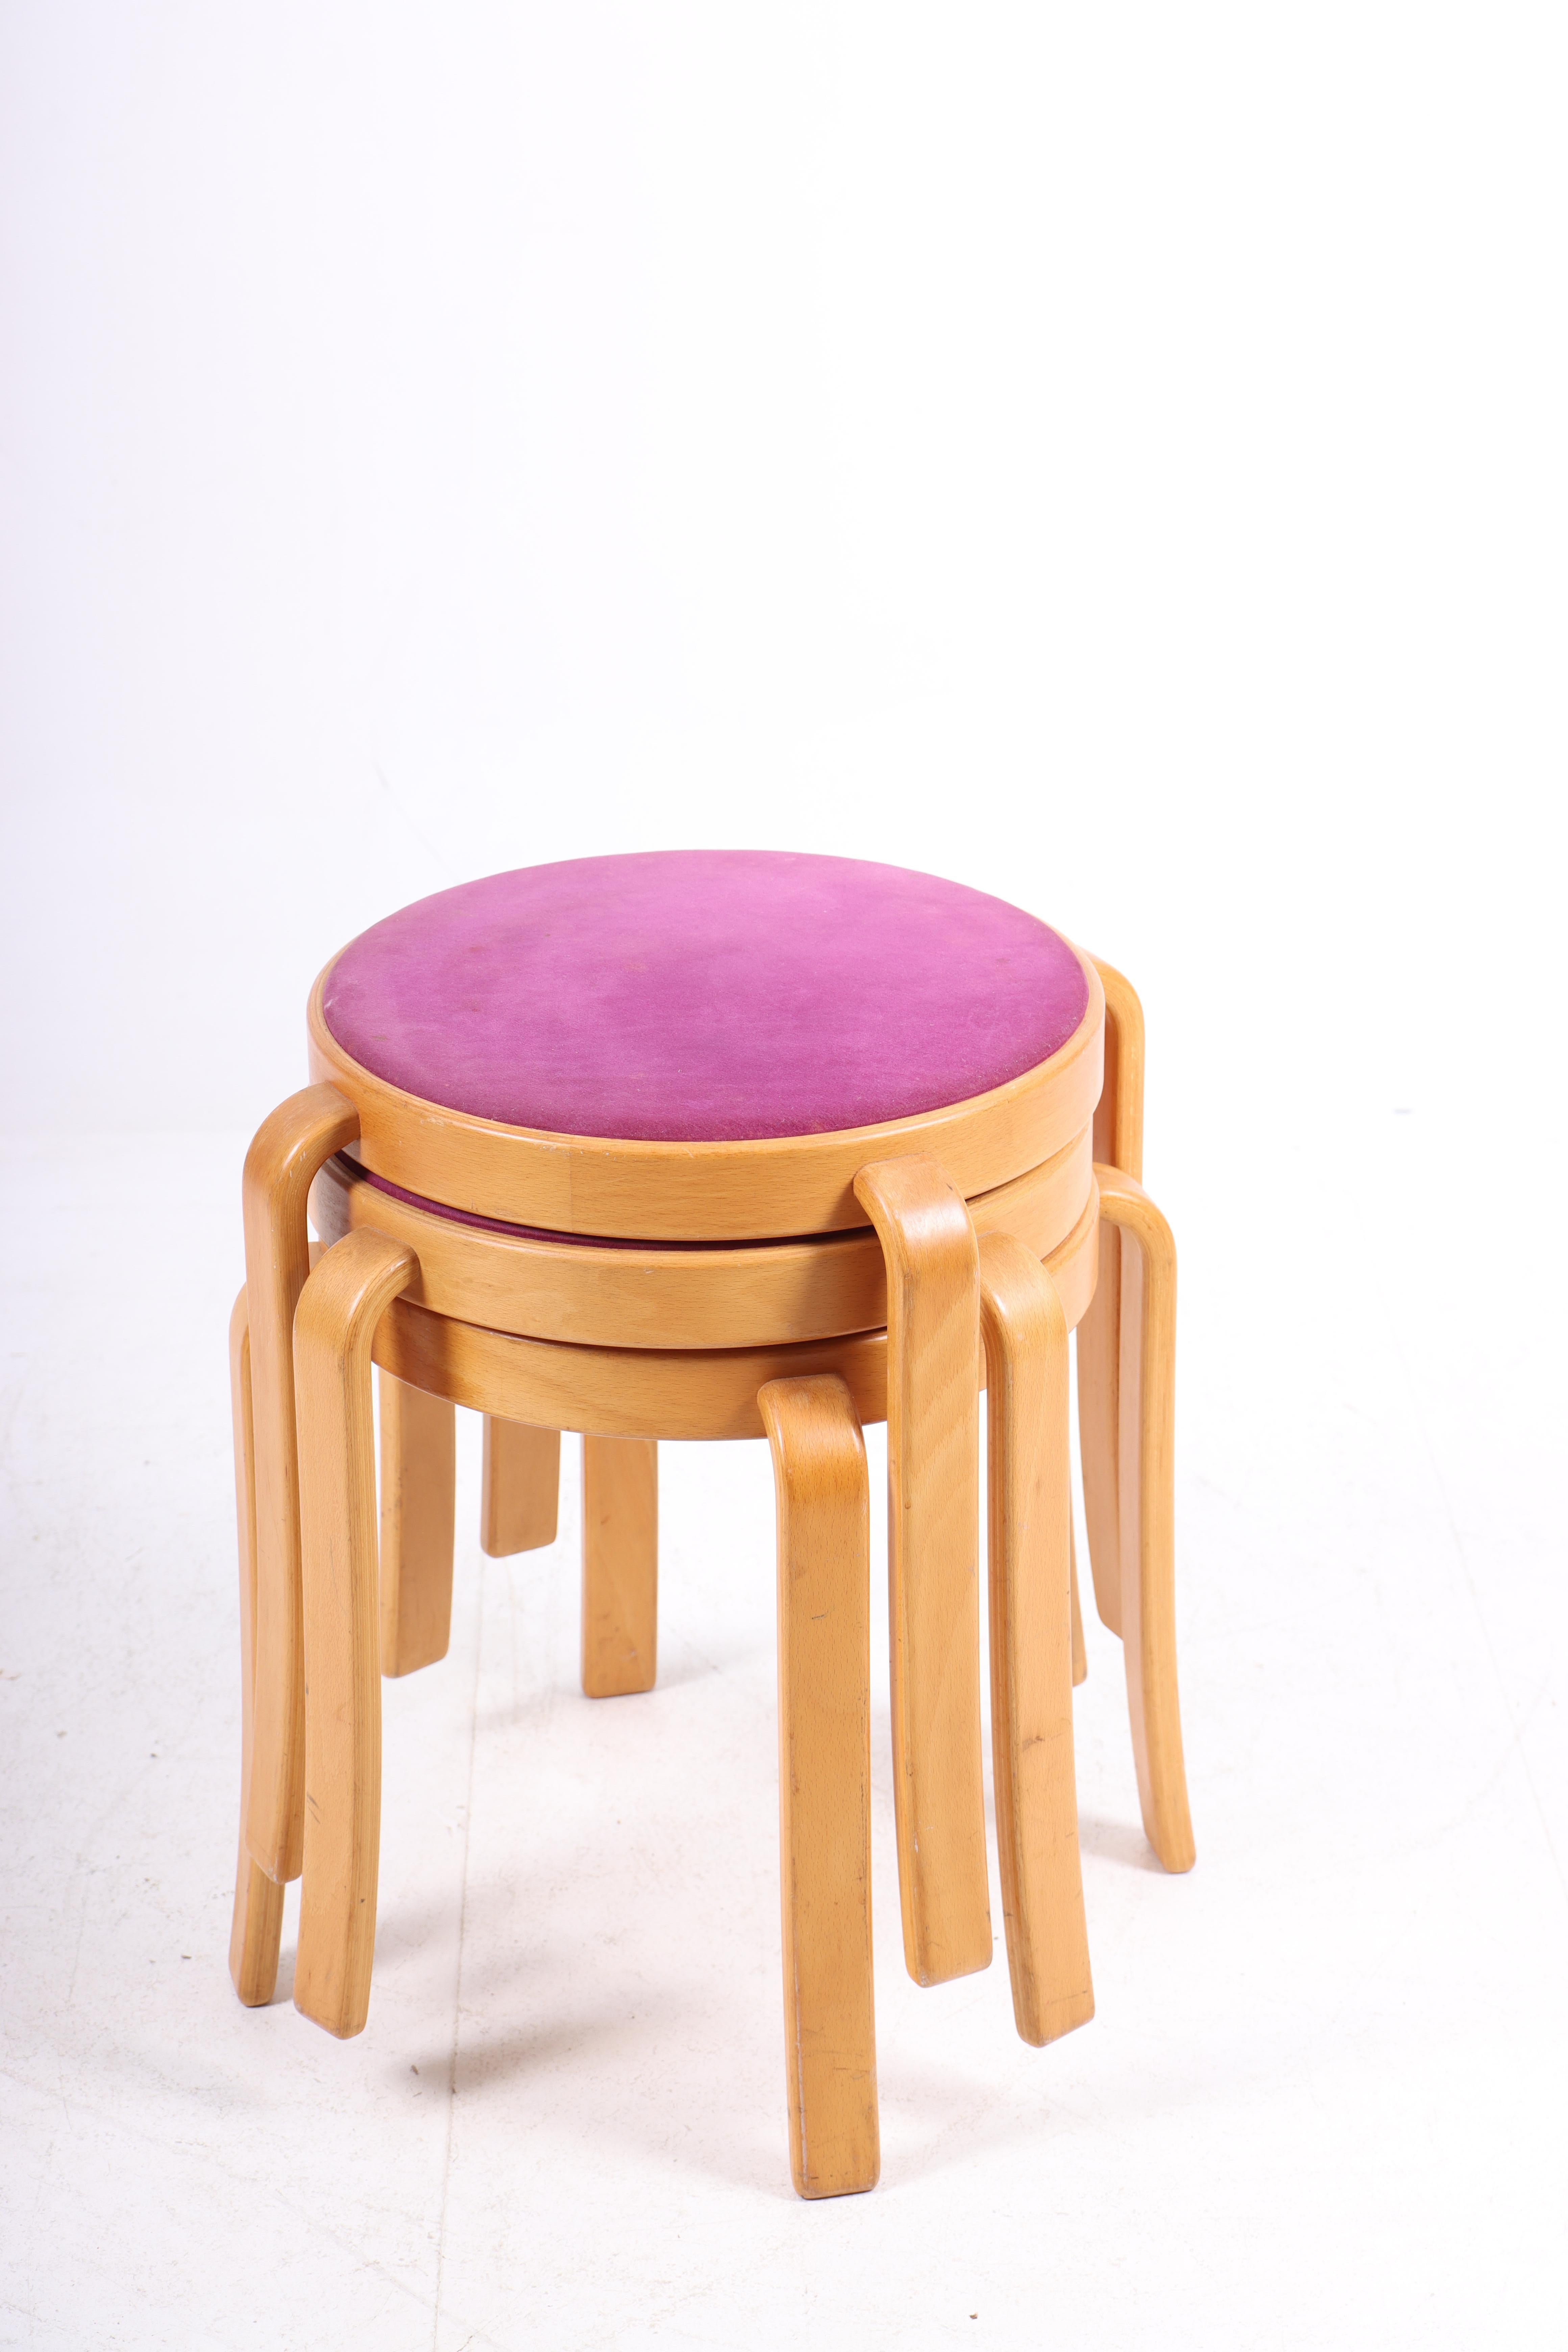 Set of three stools in beech frame and wool. Designed by Danish architects Johnny Sørensen and Rud Thygesen.